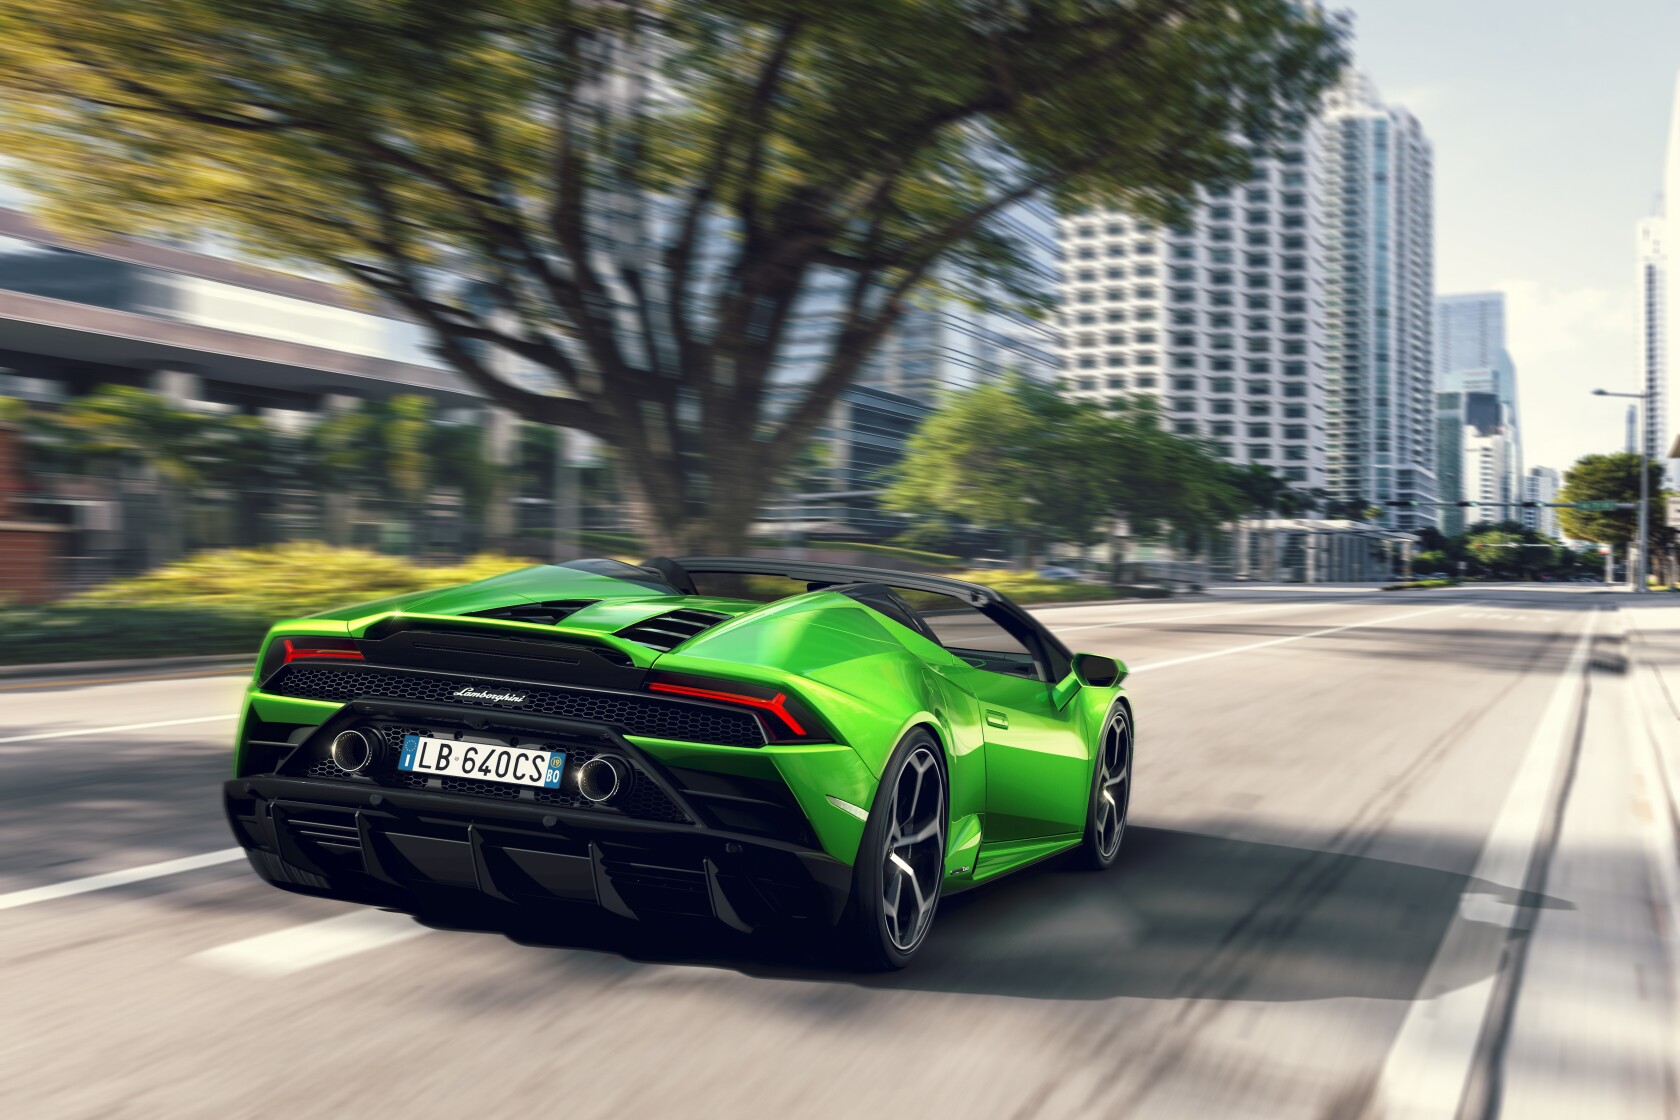 Lamborghinis 2020 Huracan Evo Is A Hell Of A Ride But